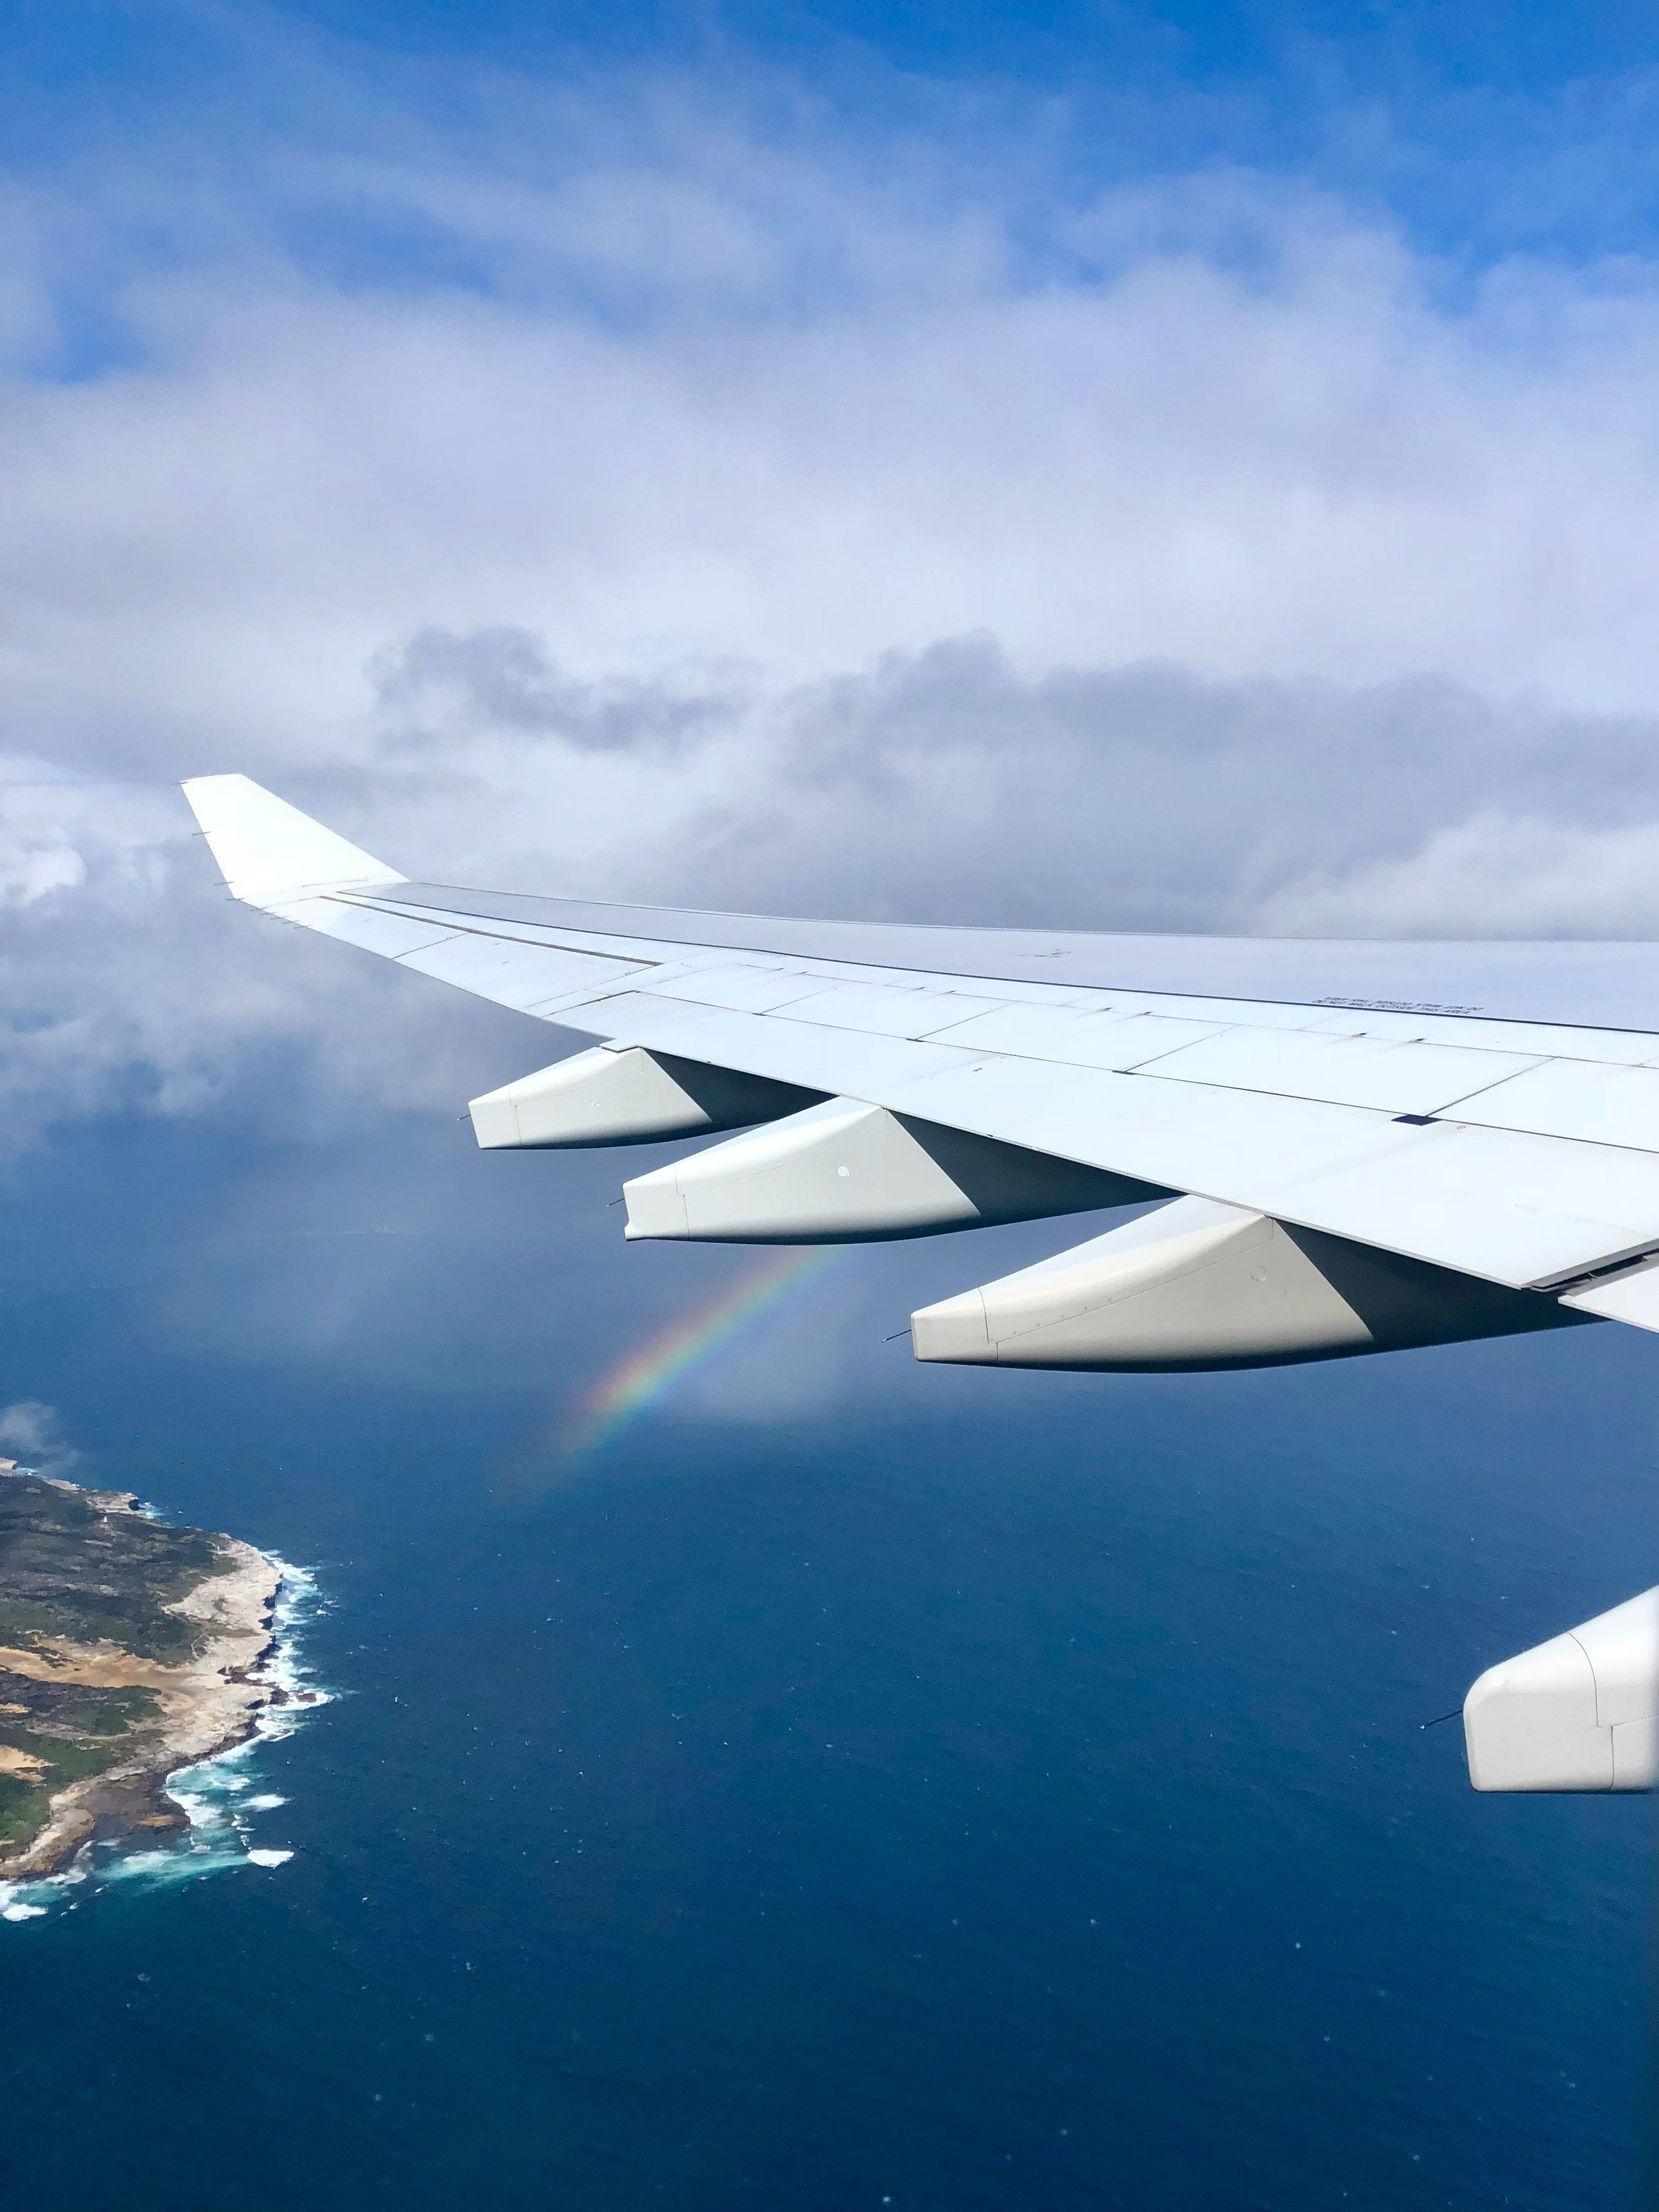 A view of a plane wing over the ocean with a rainbow below - Travel, airplane